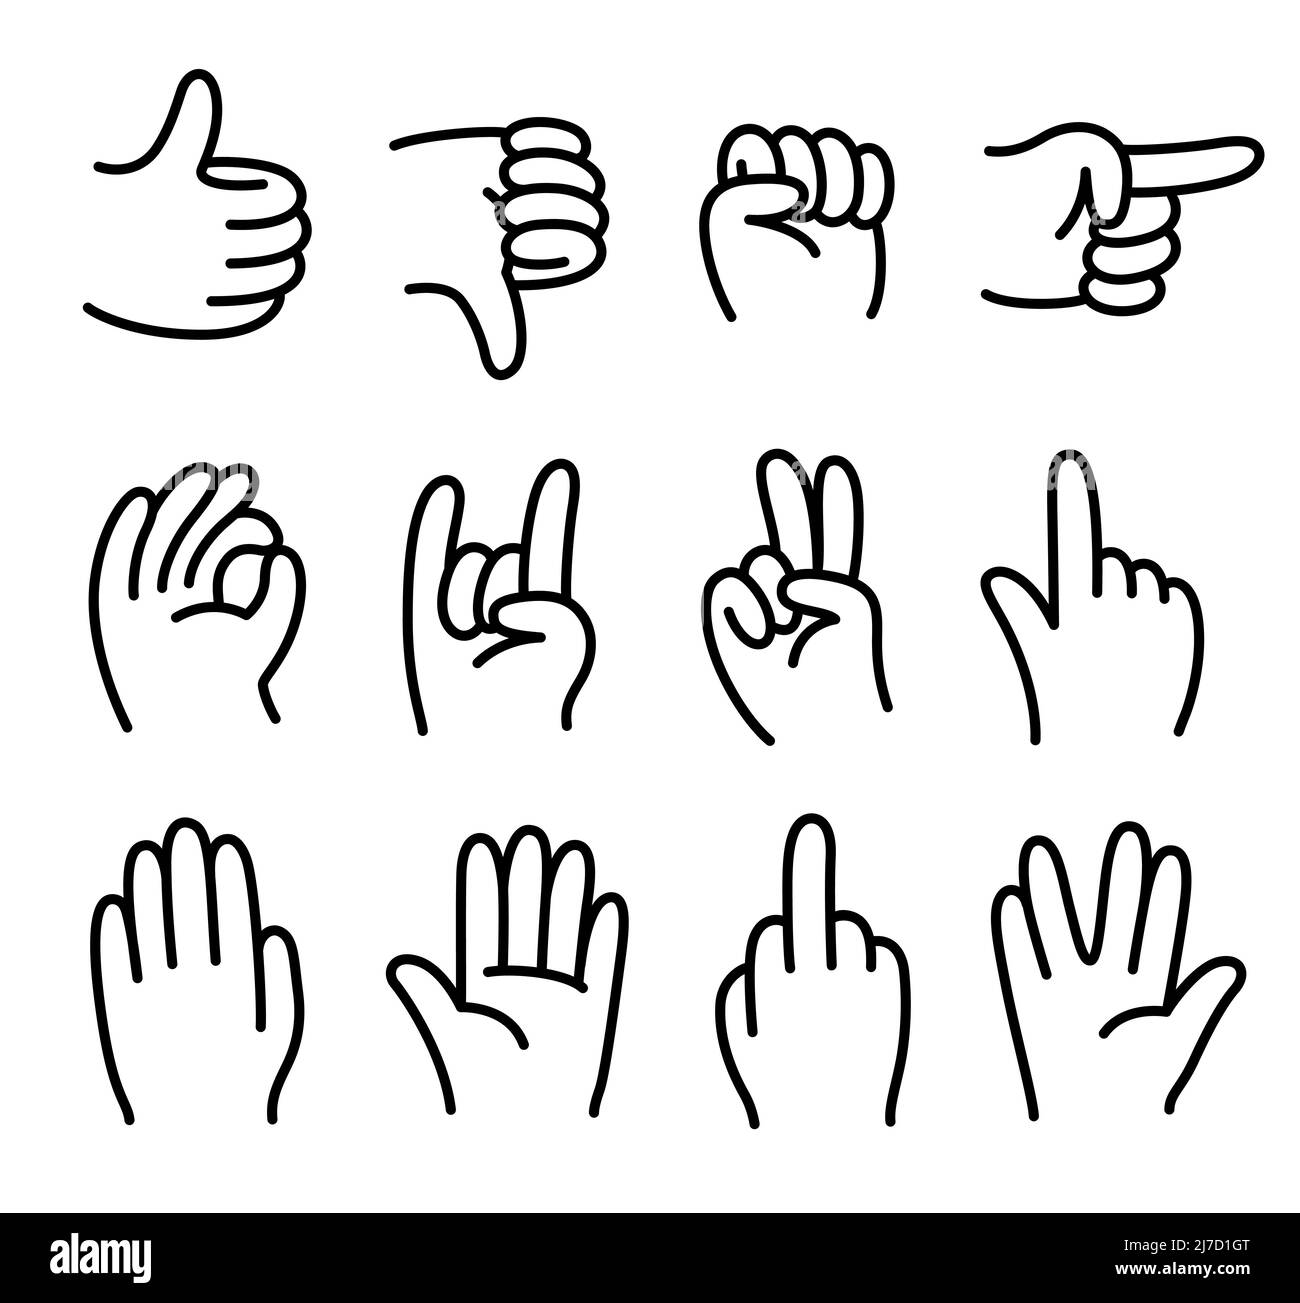 Cartoon hands gesture set. Simple hand drawn comic style icons. Black and white line art, vector illustration. Stock Vector